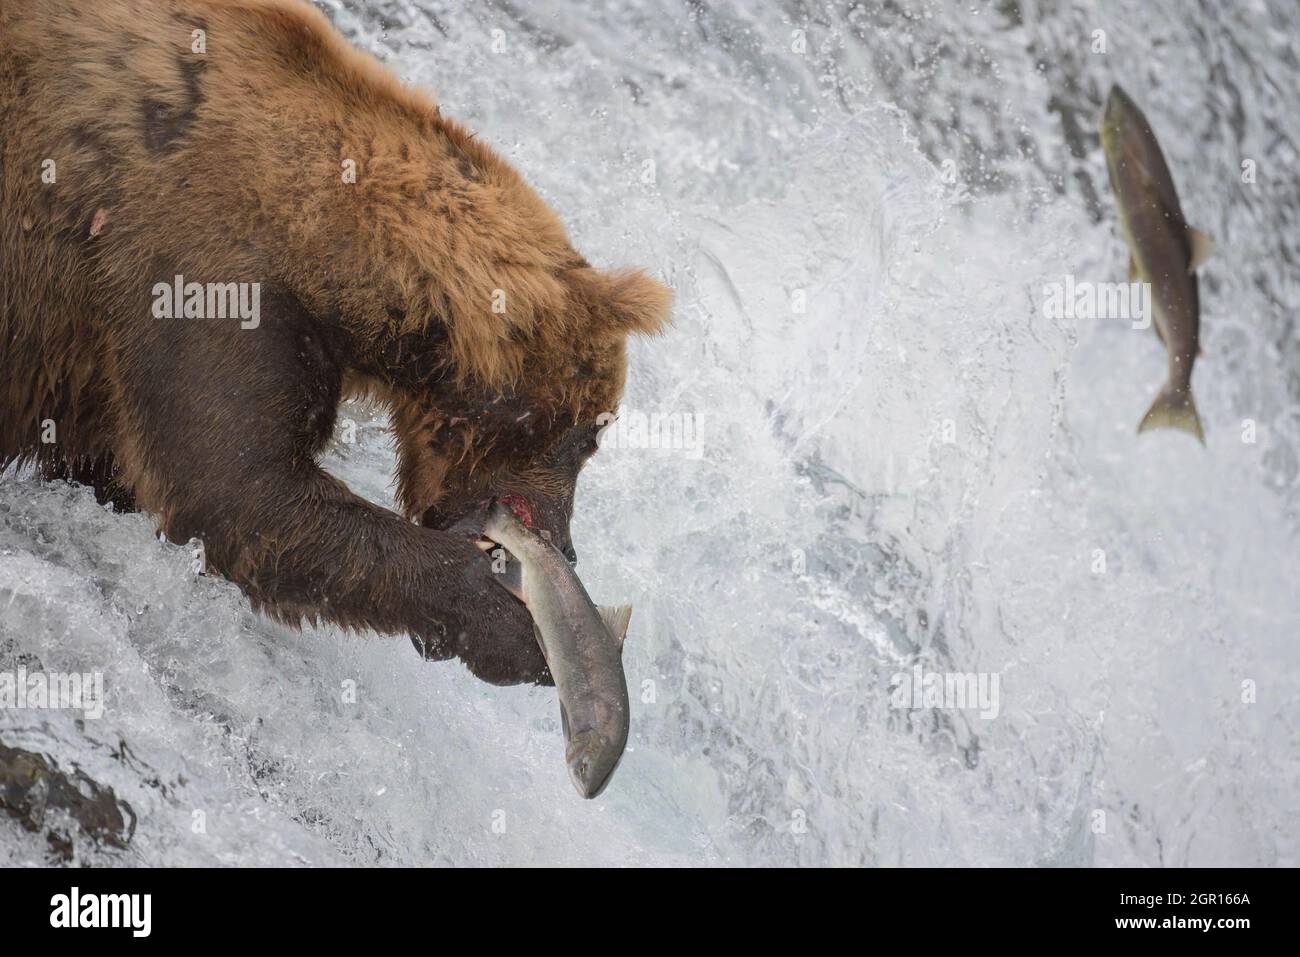 An adult Brown Bear known as 775, catches a Sockeye Salmon at Brooks Falls in Katmai National Park and Preserve September 29, 2021 near King Salmon, Alaska. The park is holding the annual Fat Bear contest to decide which bear gained the most weight during the summer feeding season. Stock Photo